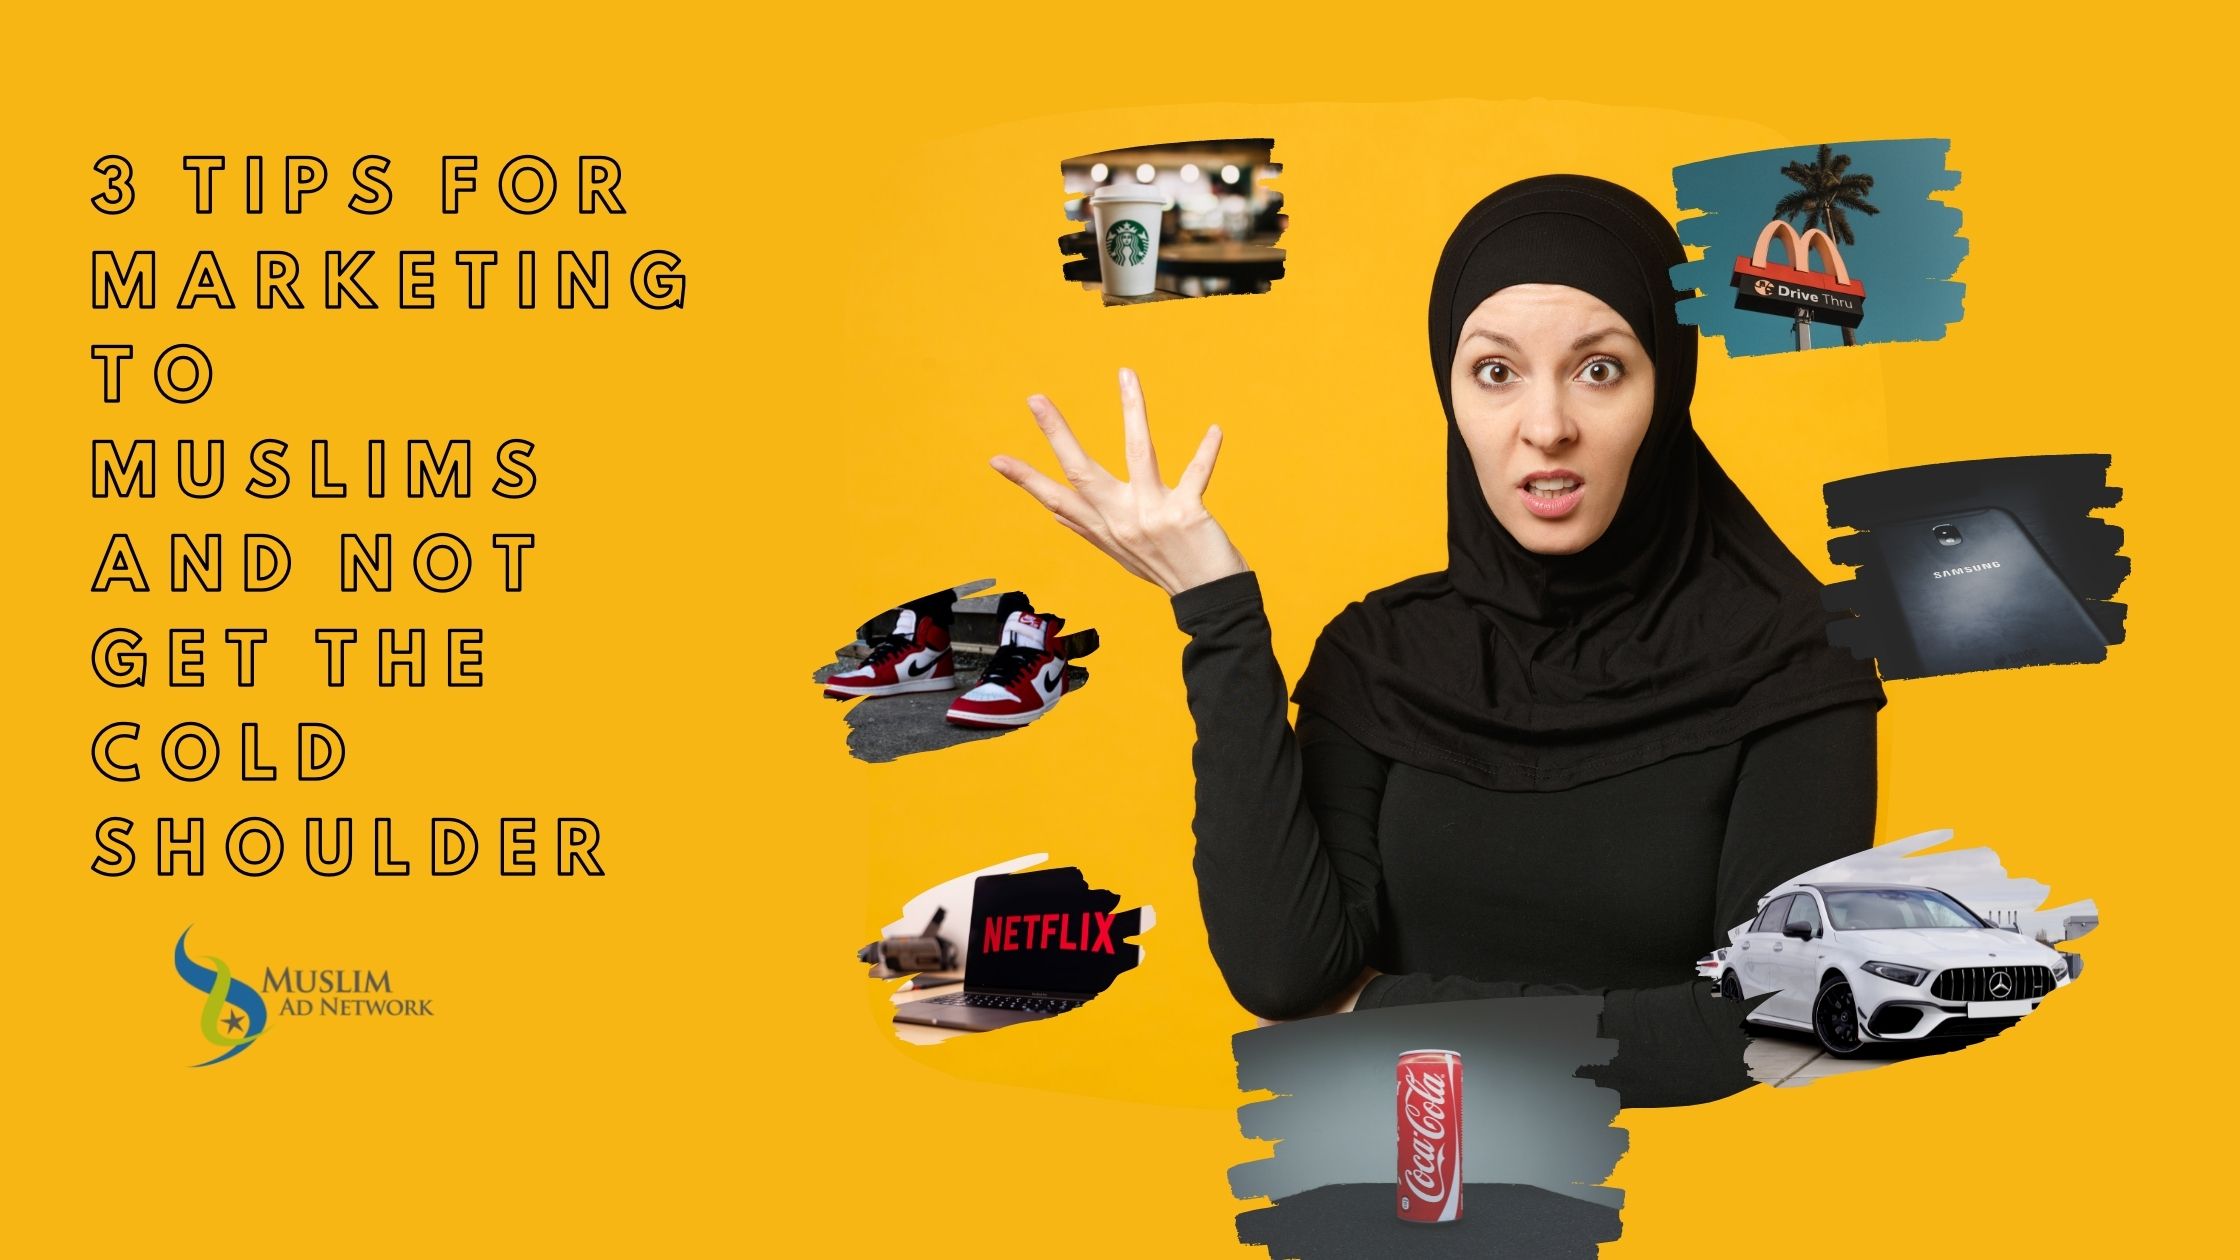 Marketing to Muslims effectively